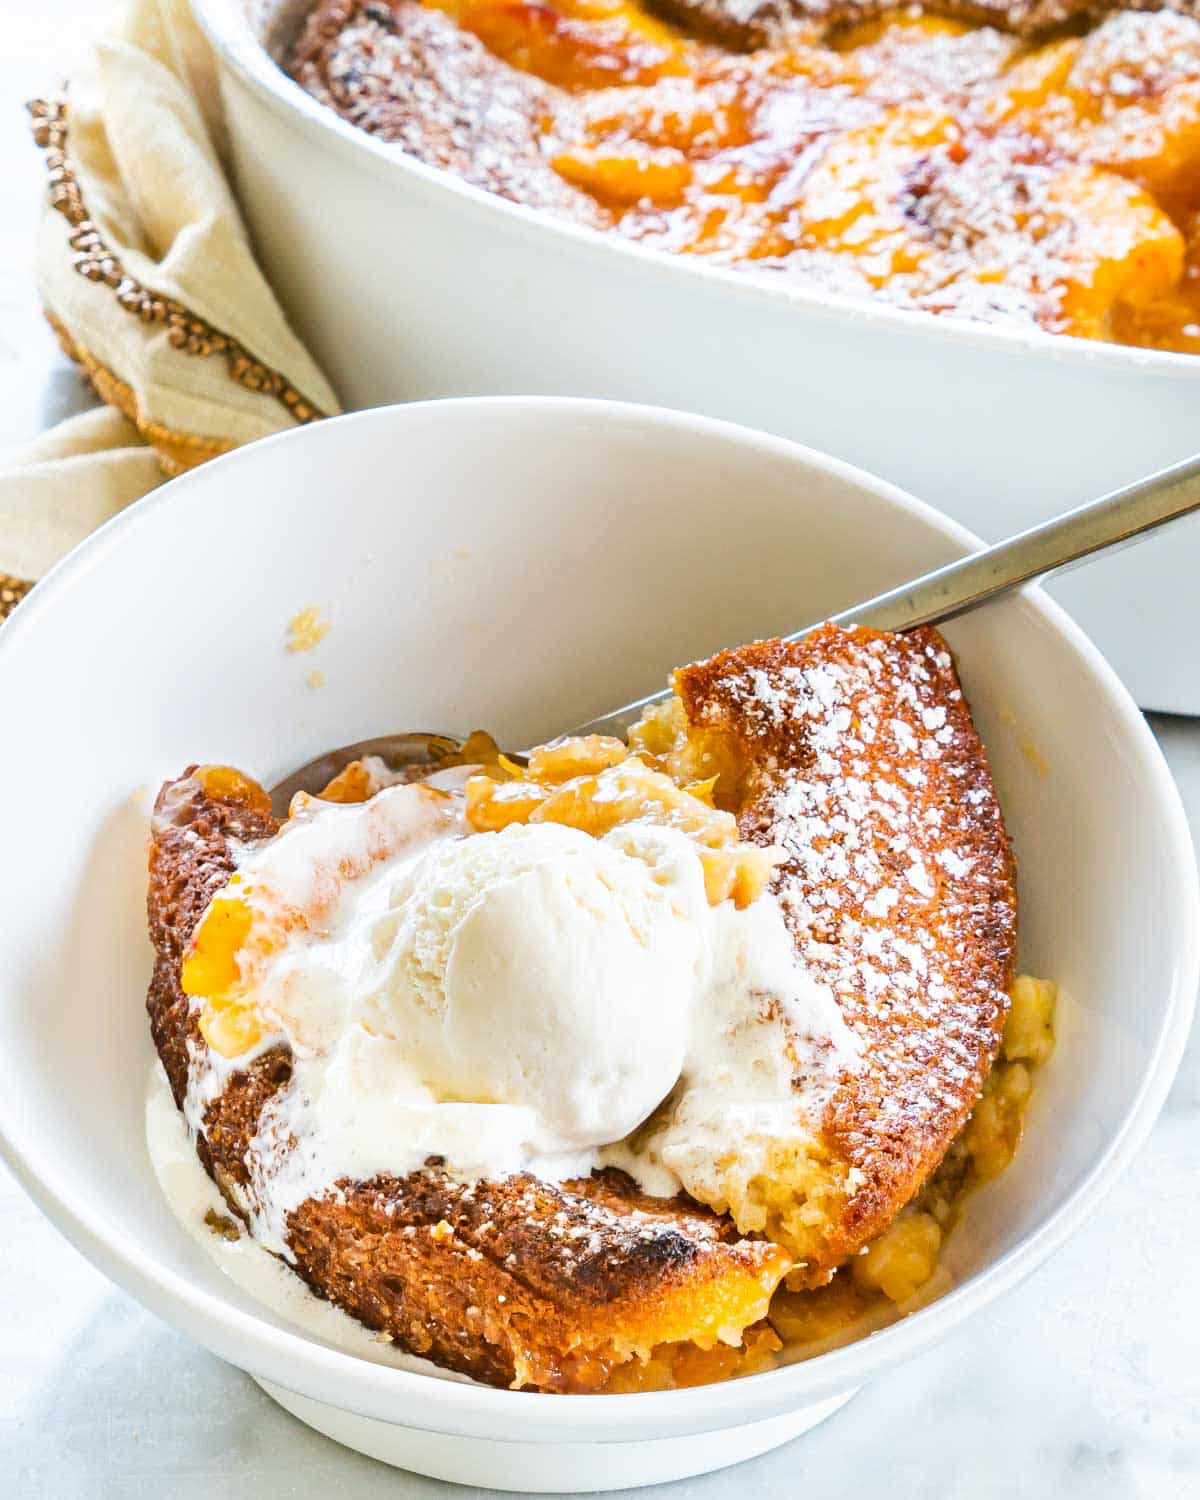 sideview shot of peach cobbler in a white bowl with a scoop of ice cream and a spoon inside